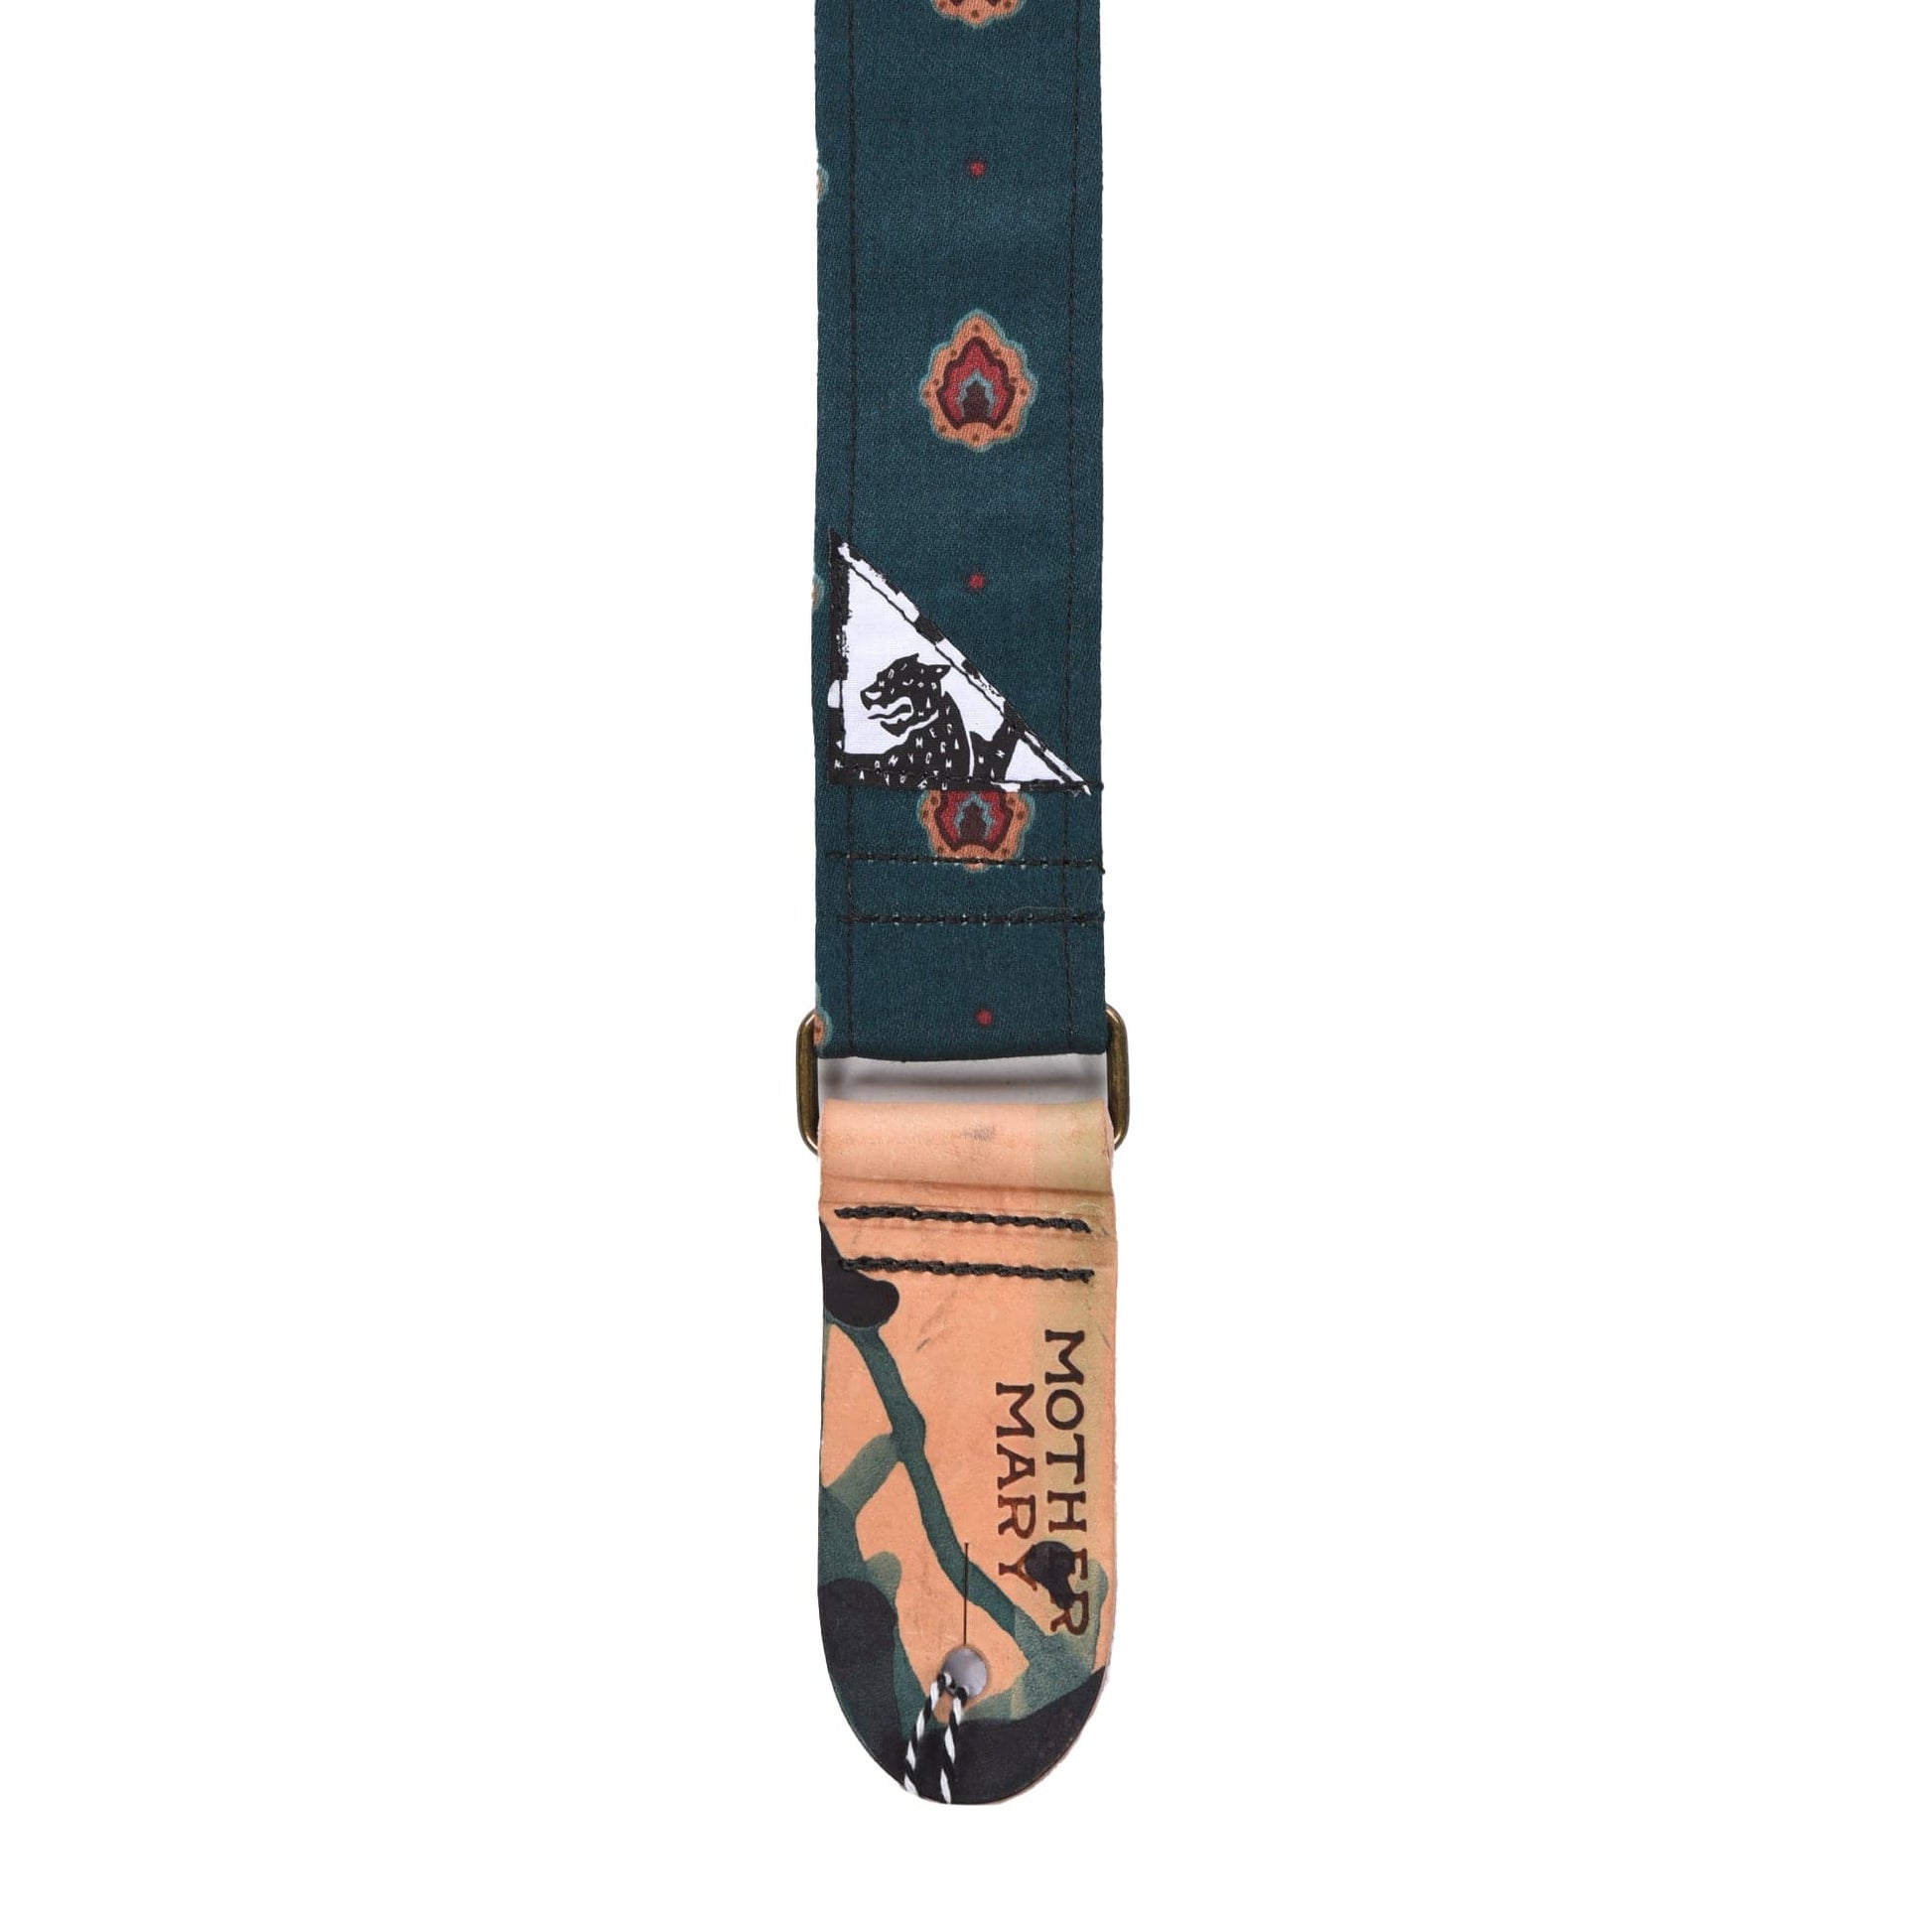 Mother Mary "Mansfield" Guitar Strap Accessories / Straps